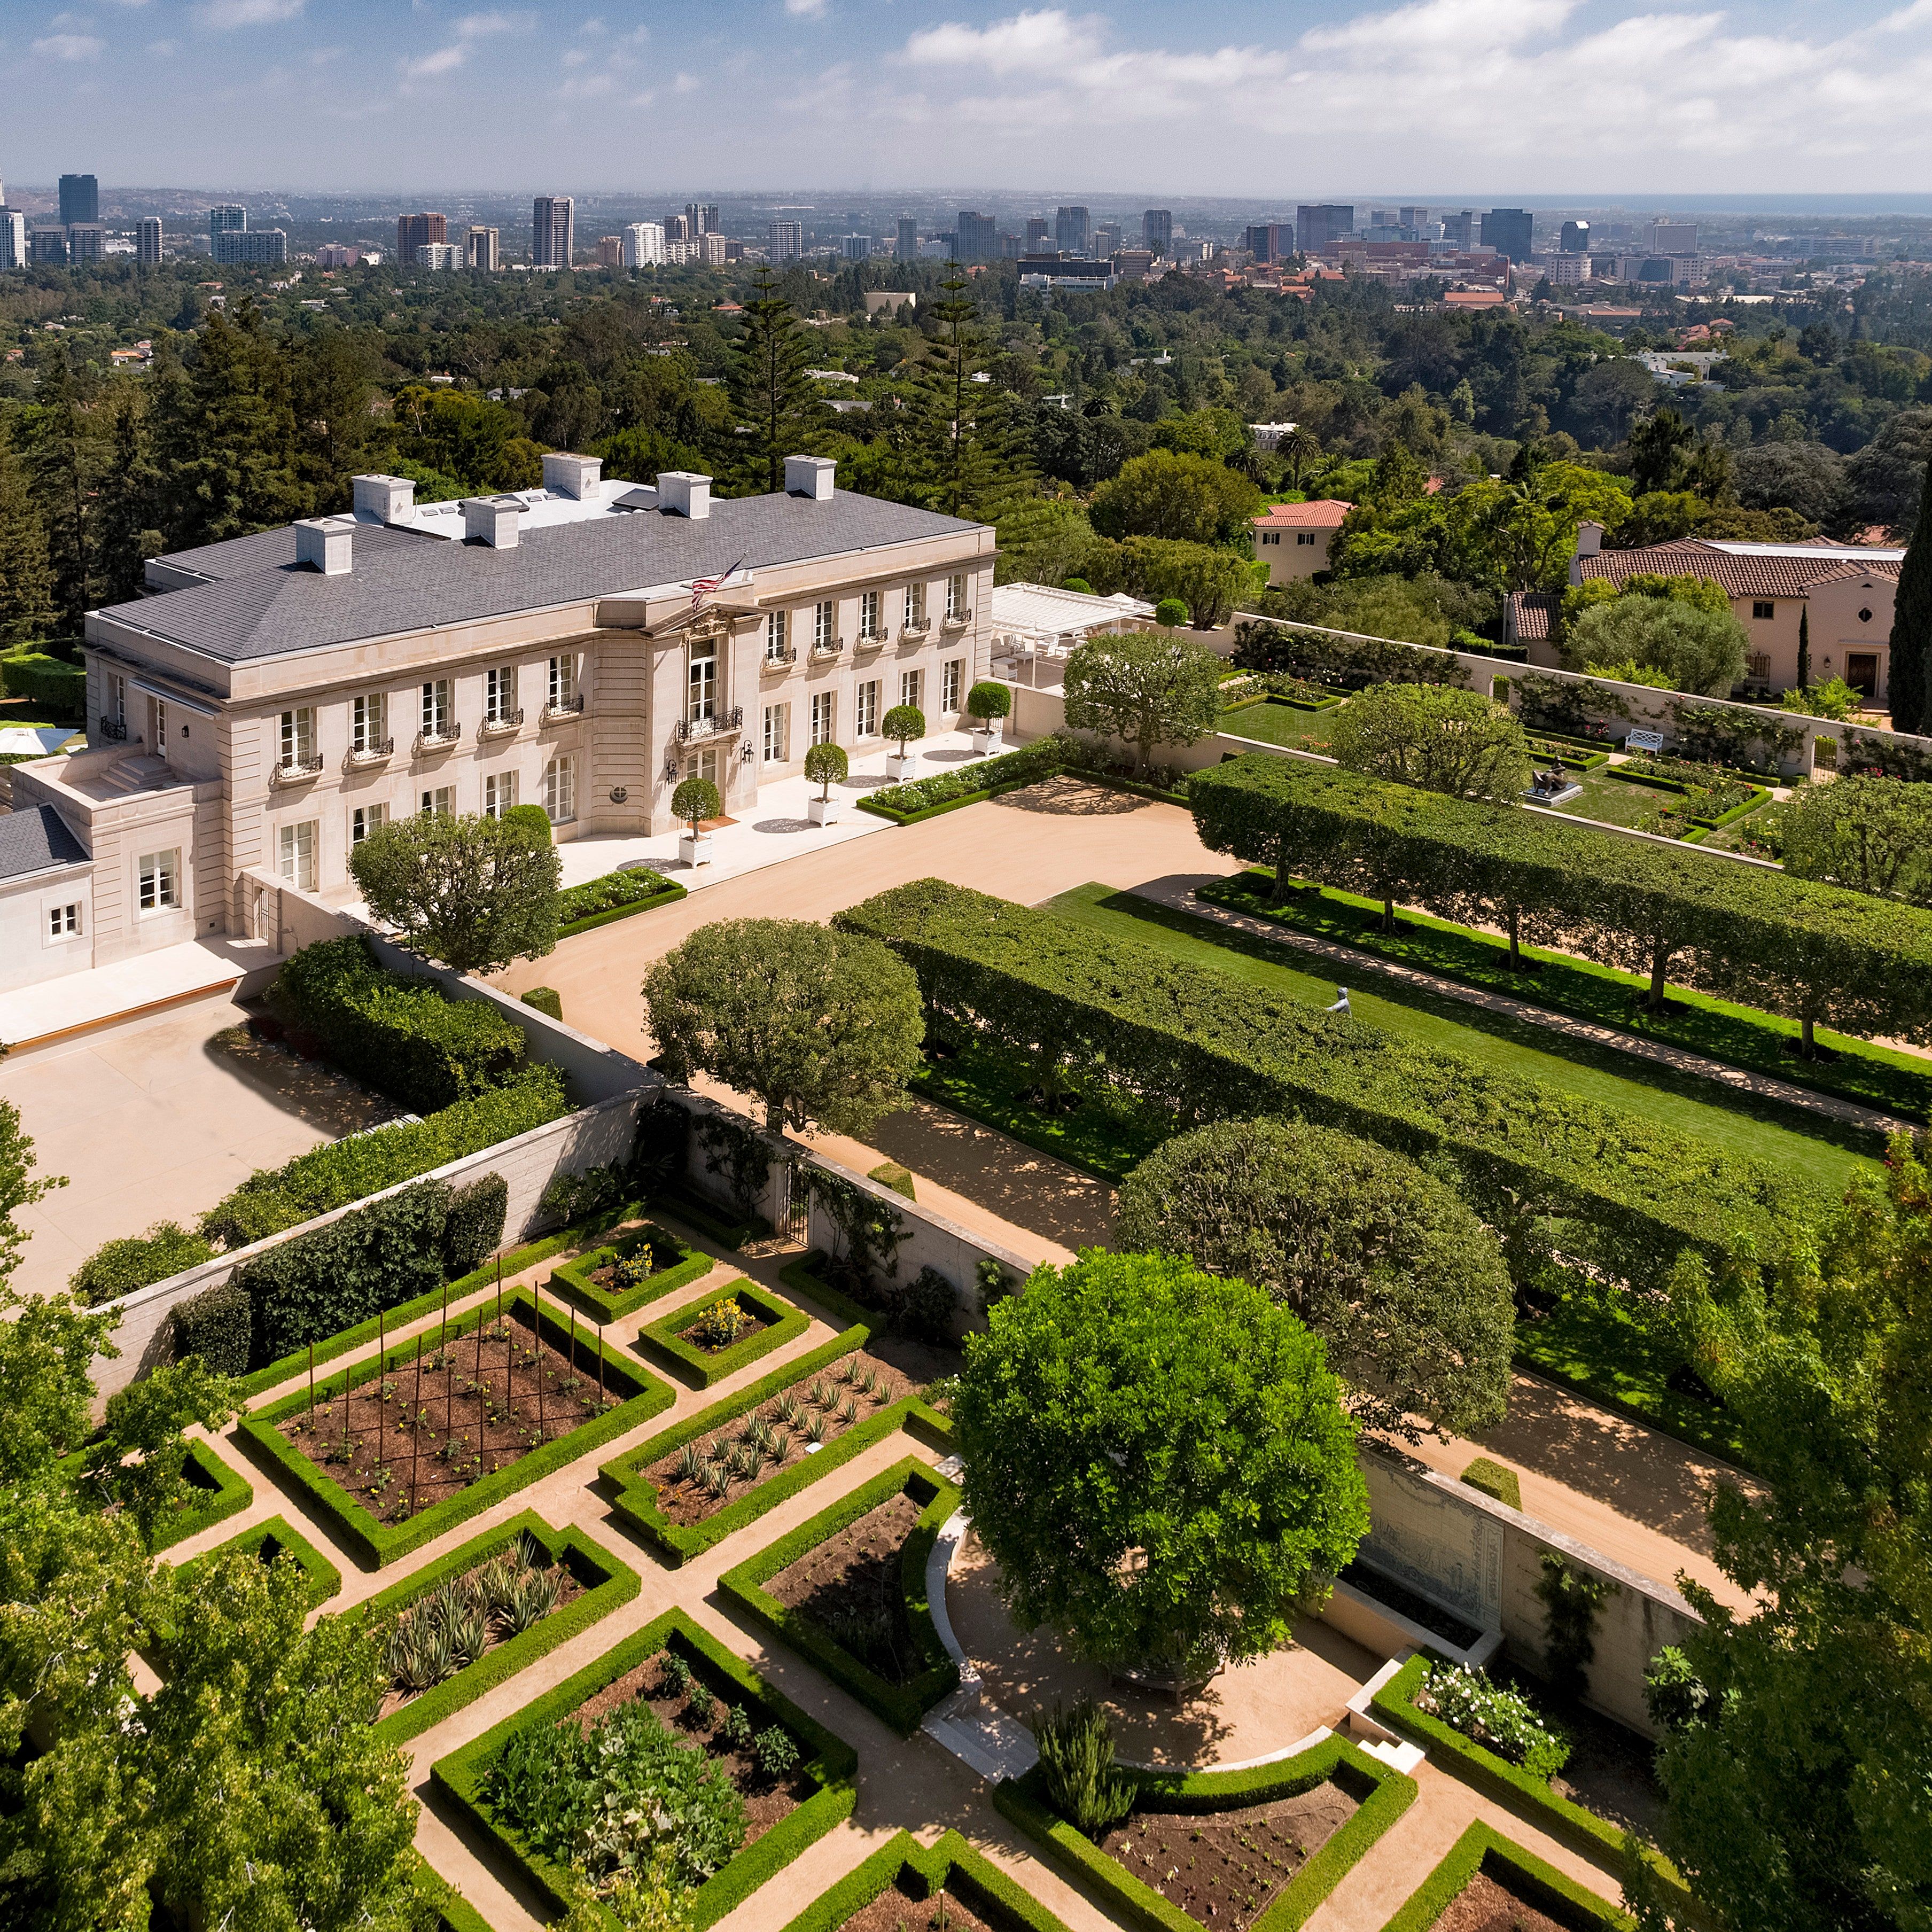 The Most Expensive House in the U.S. Has Reentered the Market at $245 Million